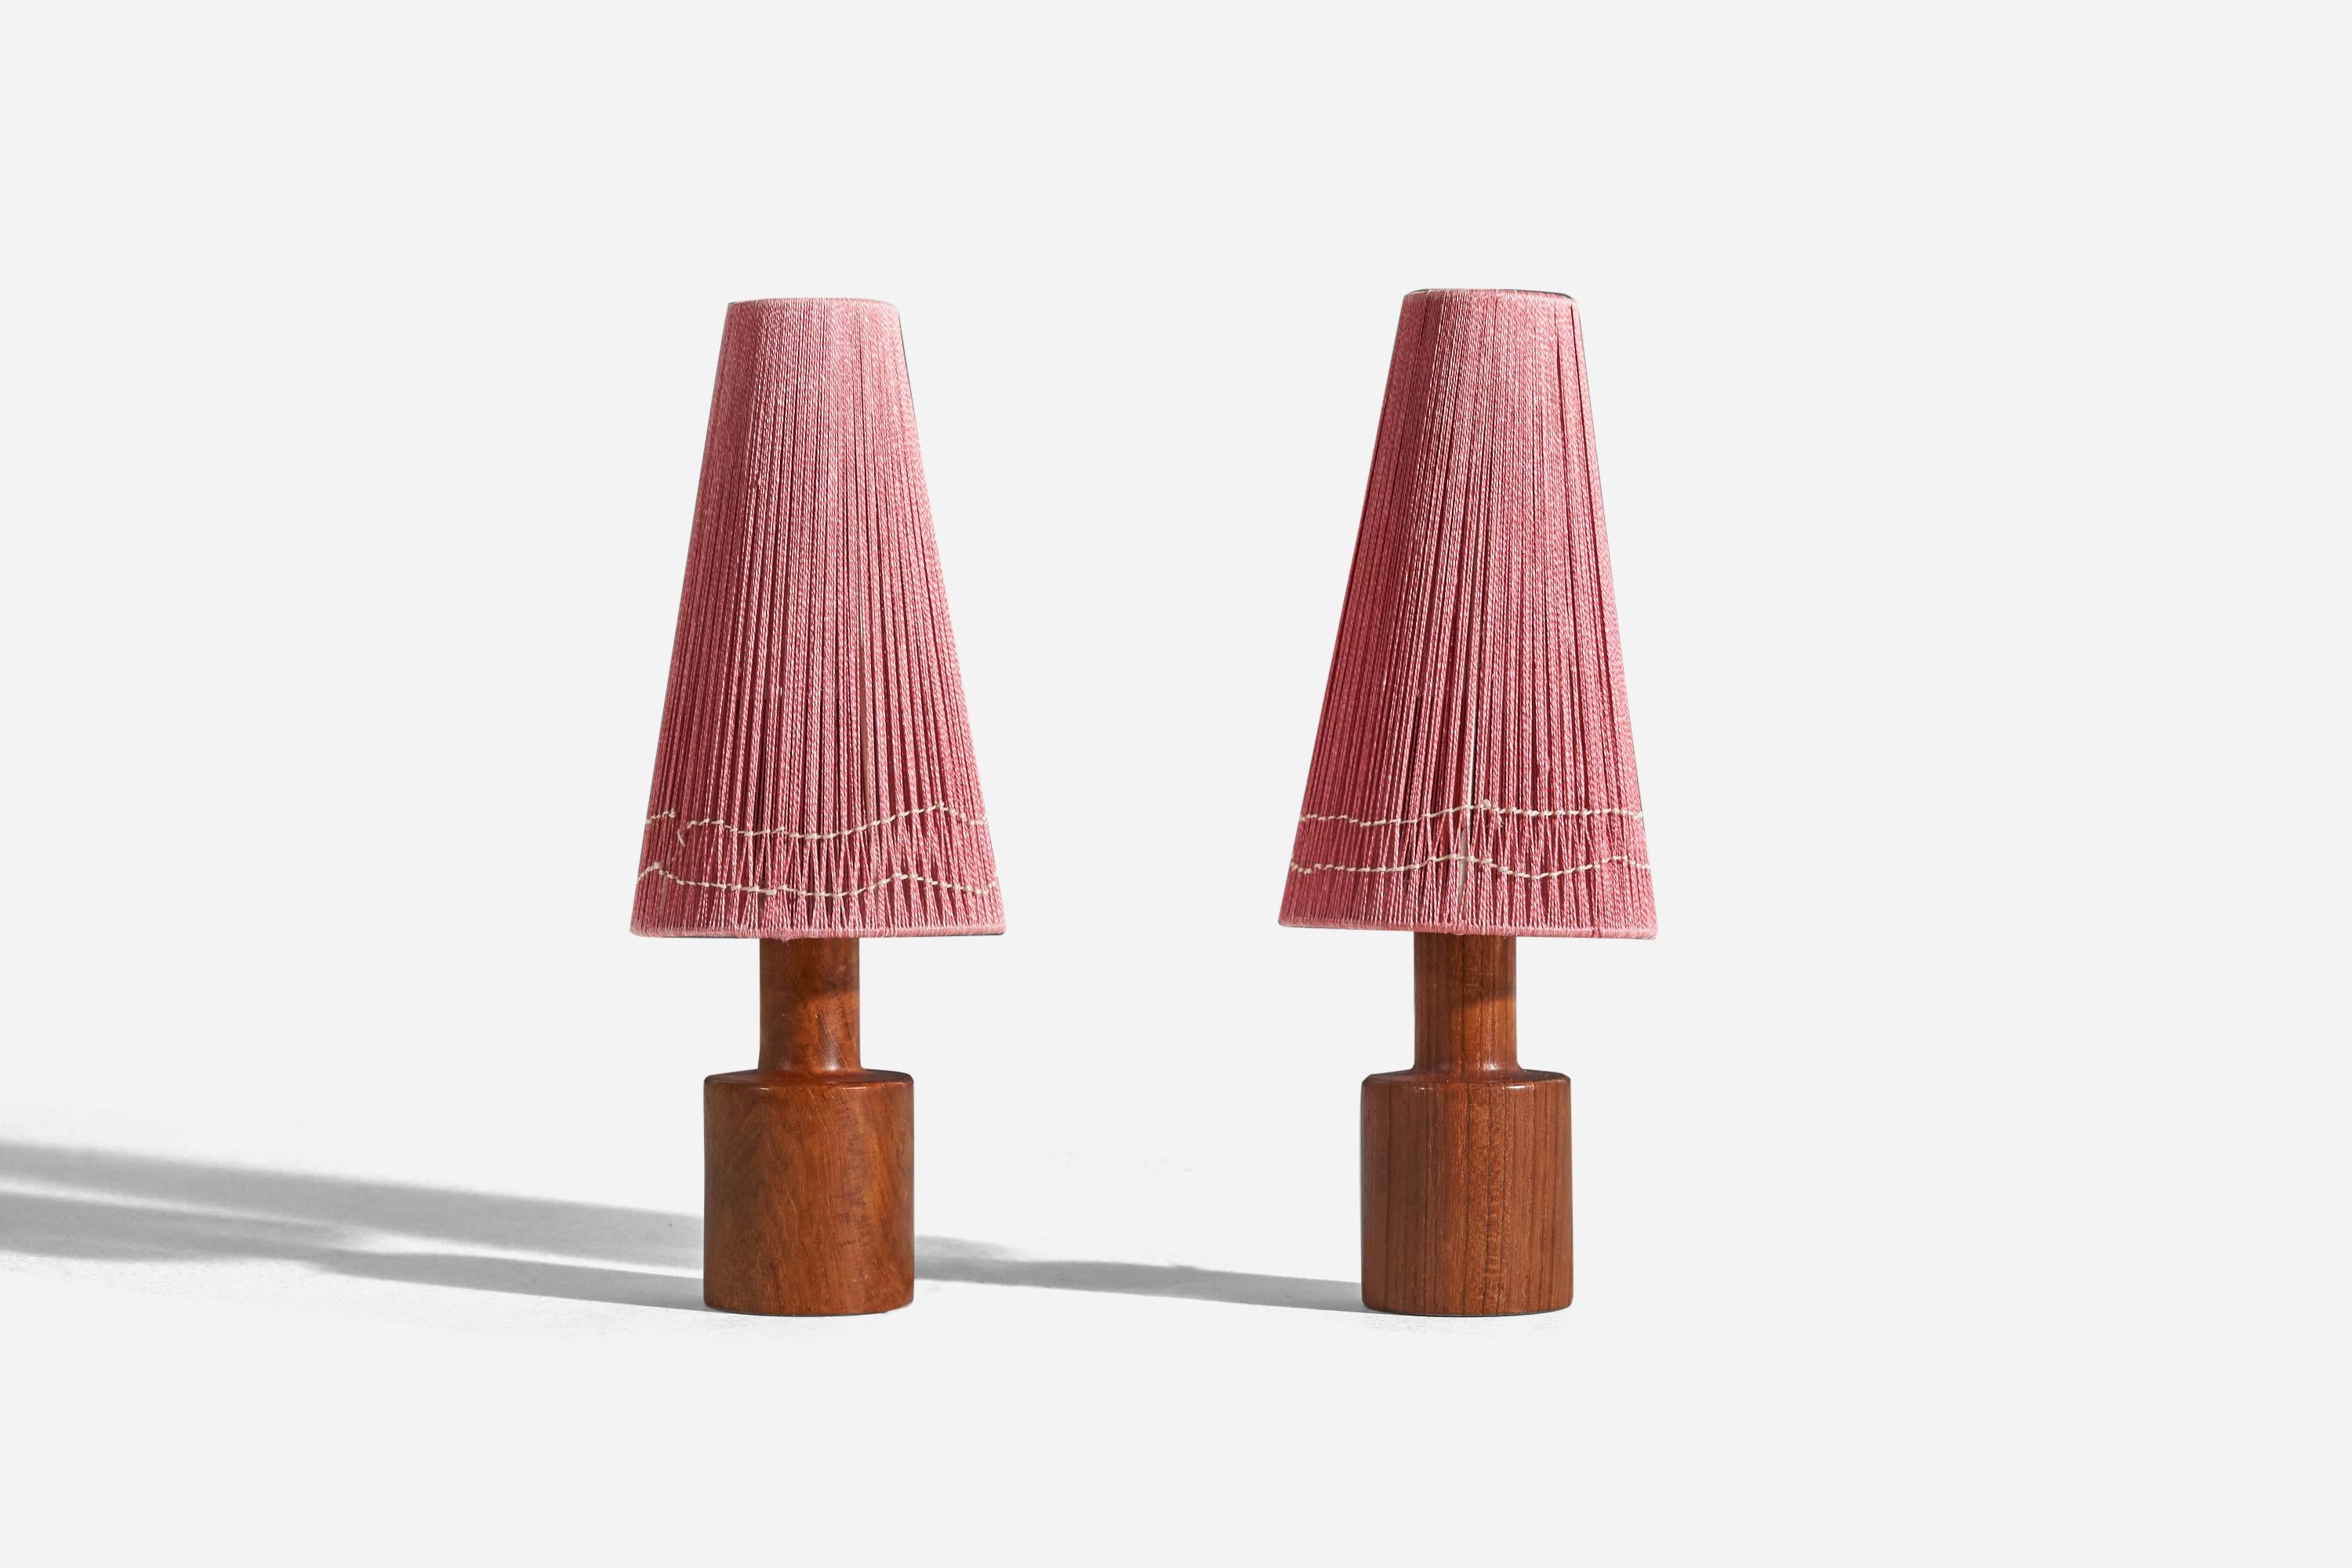 A pair of very small teak and string table lamps designed and produced in Sweden, 1950s. 

Sold with lampshade. 
Dimensions of Lamp (inches) : 6.18 x 2.17 x 2.17 (height x width x depth)
Dimensions of Shade (inches) : 1.75 x 3.82 x 6.5 (top